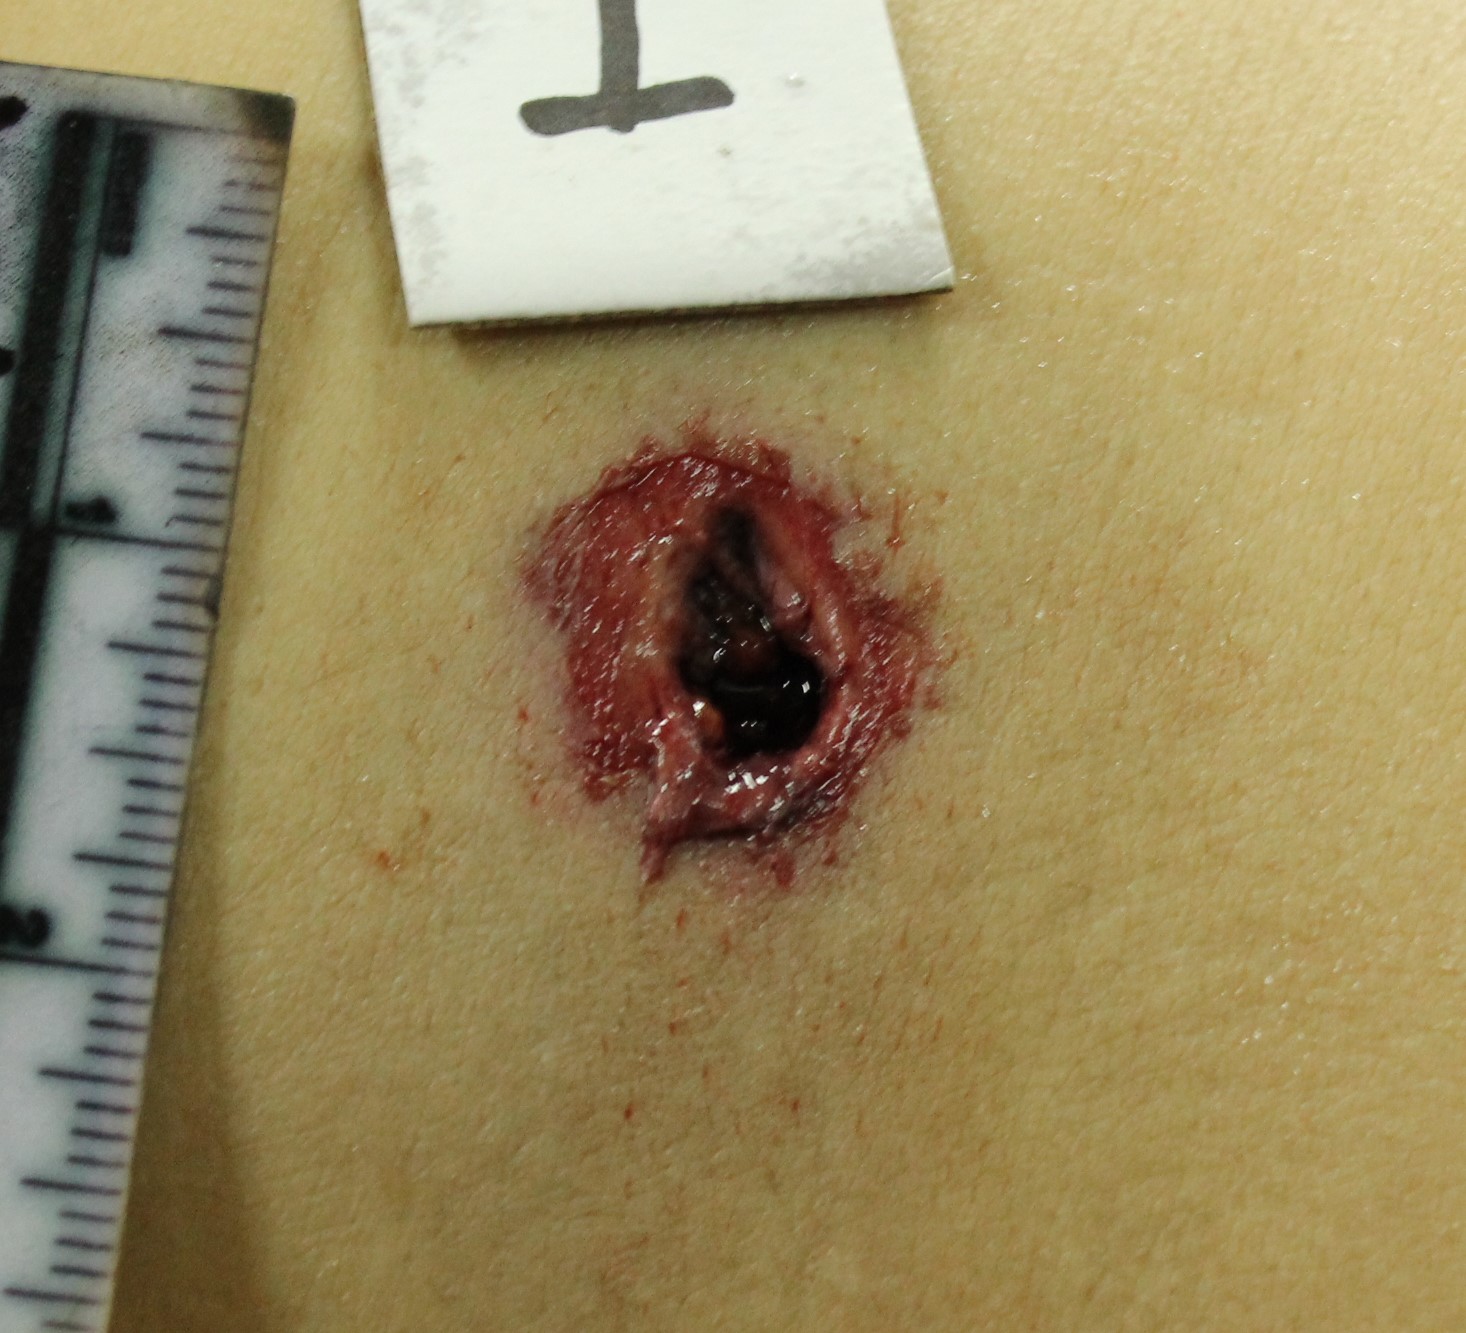 Figure 2 - Exit wound from a rifled small arm (revolver) showing larger injury, in comparison with the entry wound. Also, the injury is irregular in shape, with outward beveling of the margin.